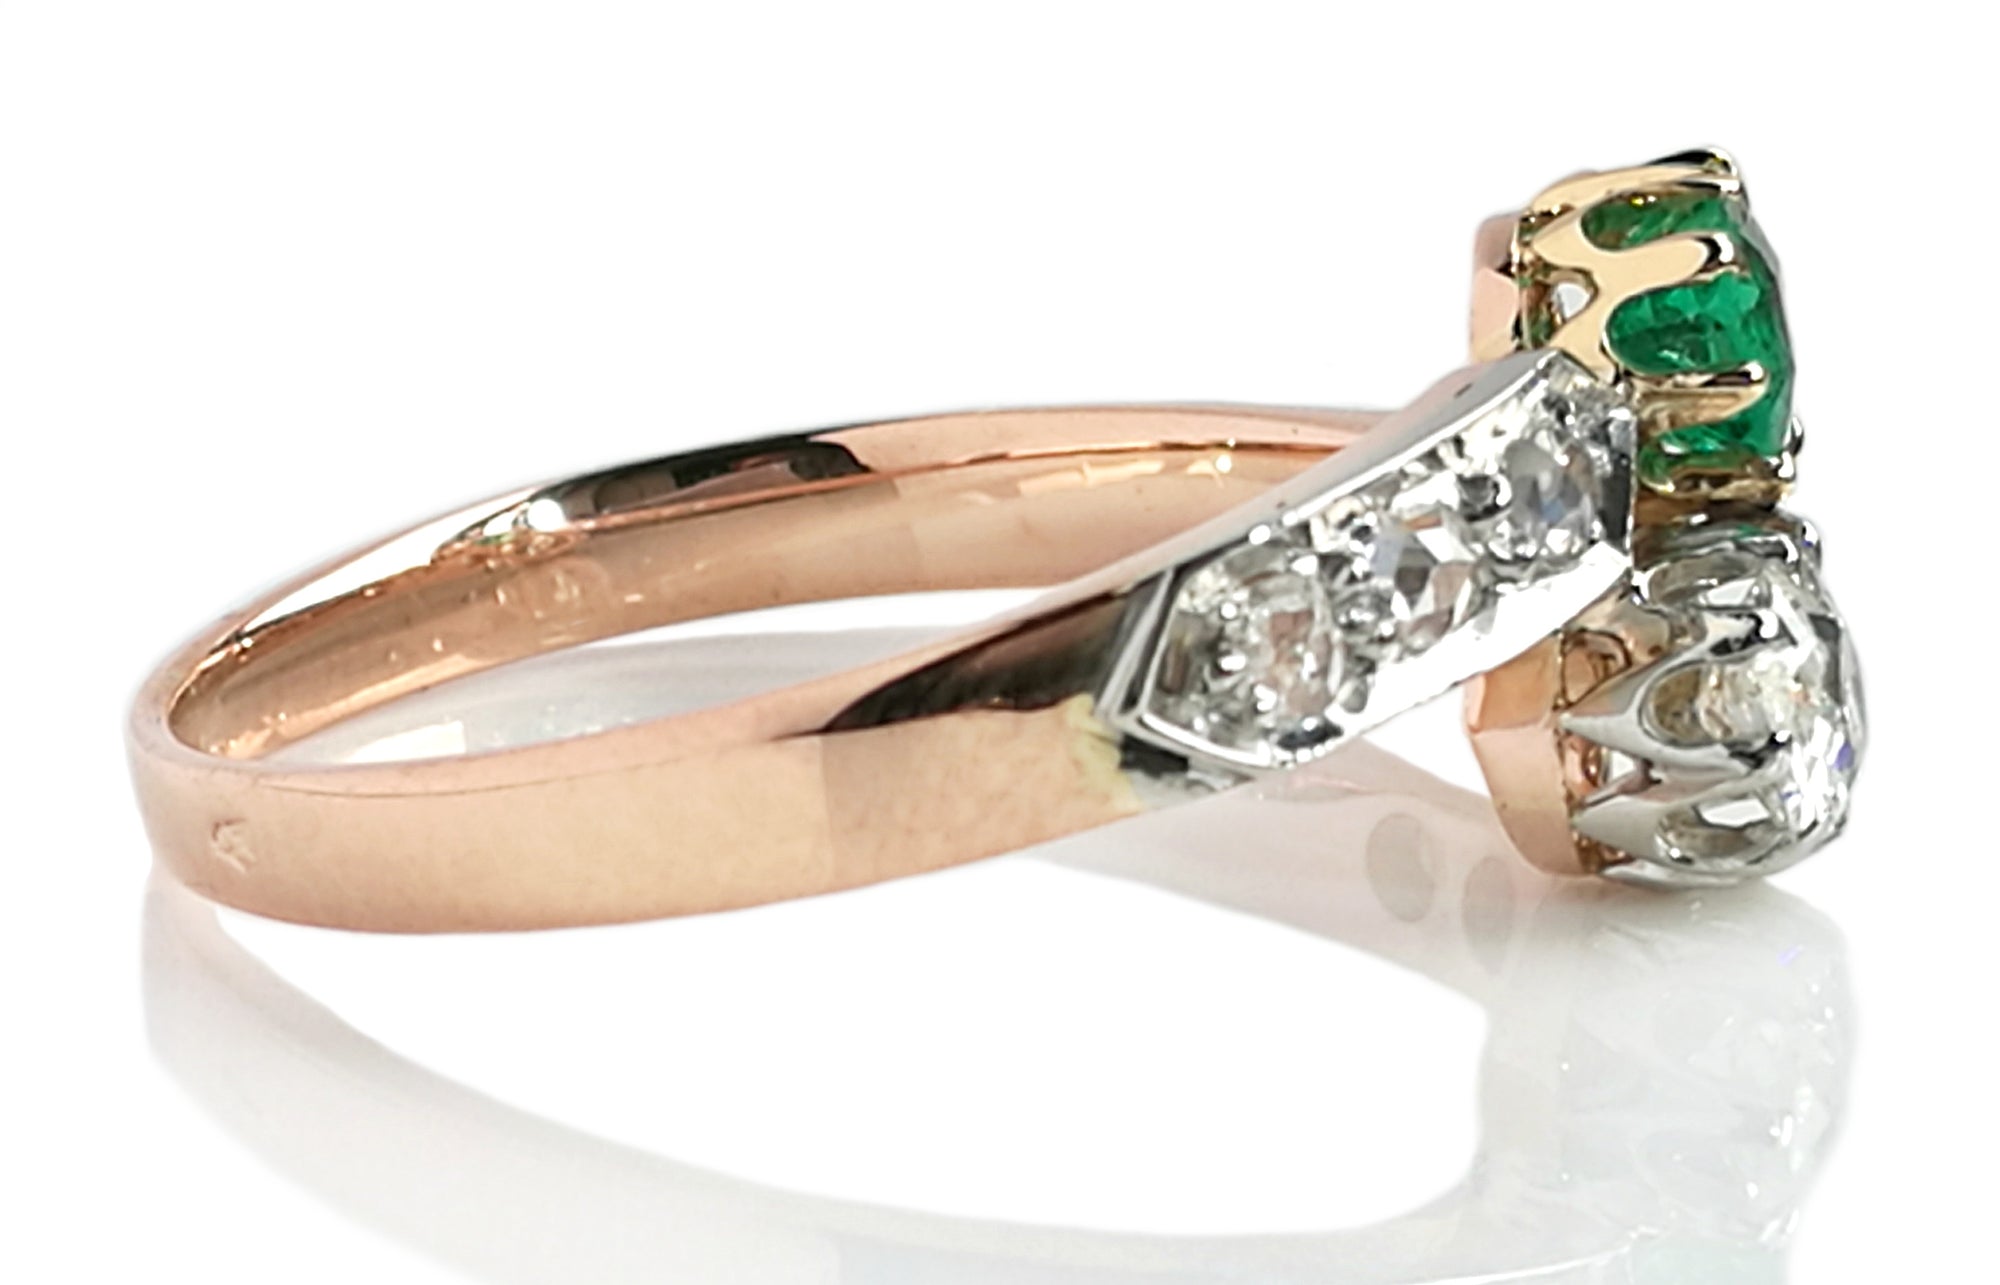 Victorian French Toi et Moi 0.82tcw Diamond & Emerald Engagement Ring in 18k Gold